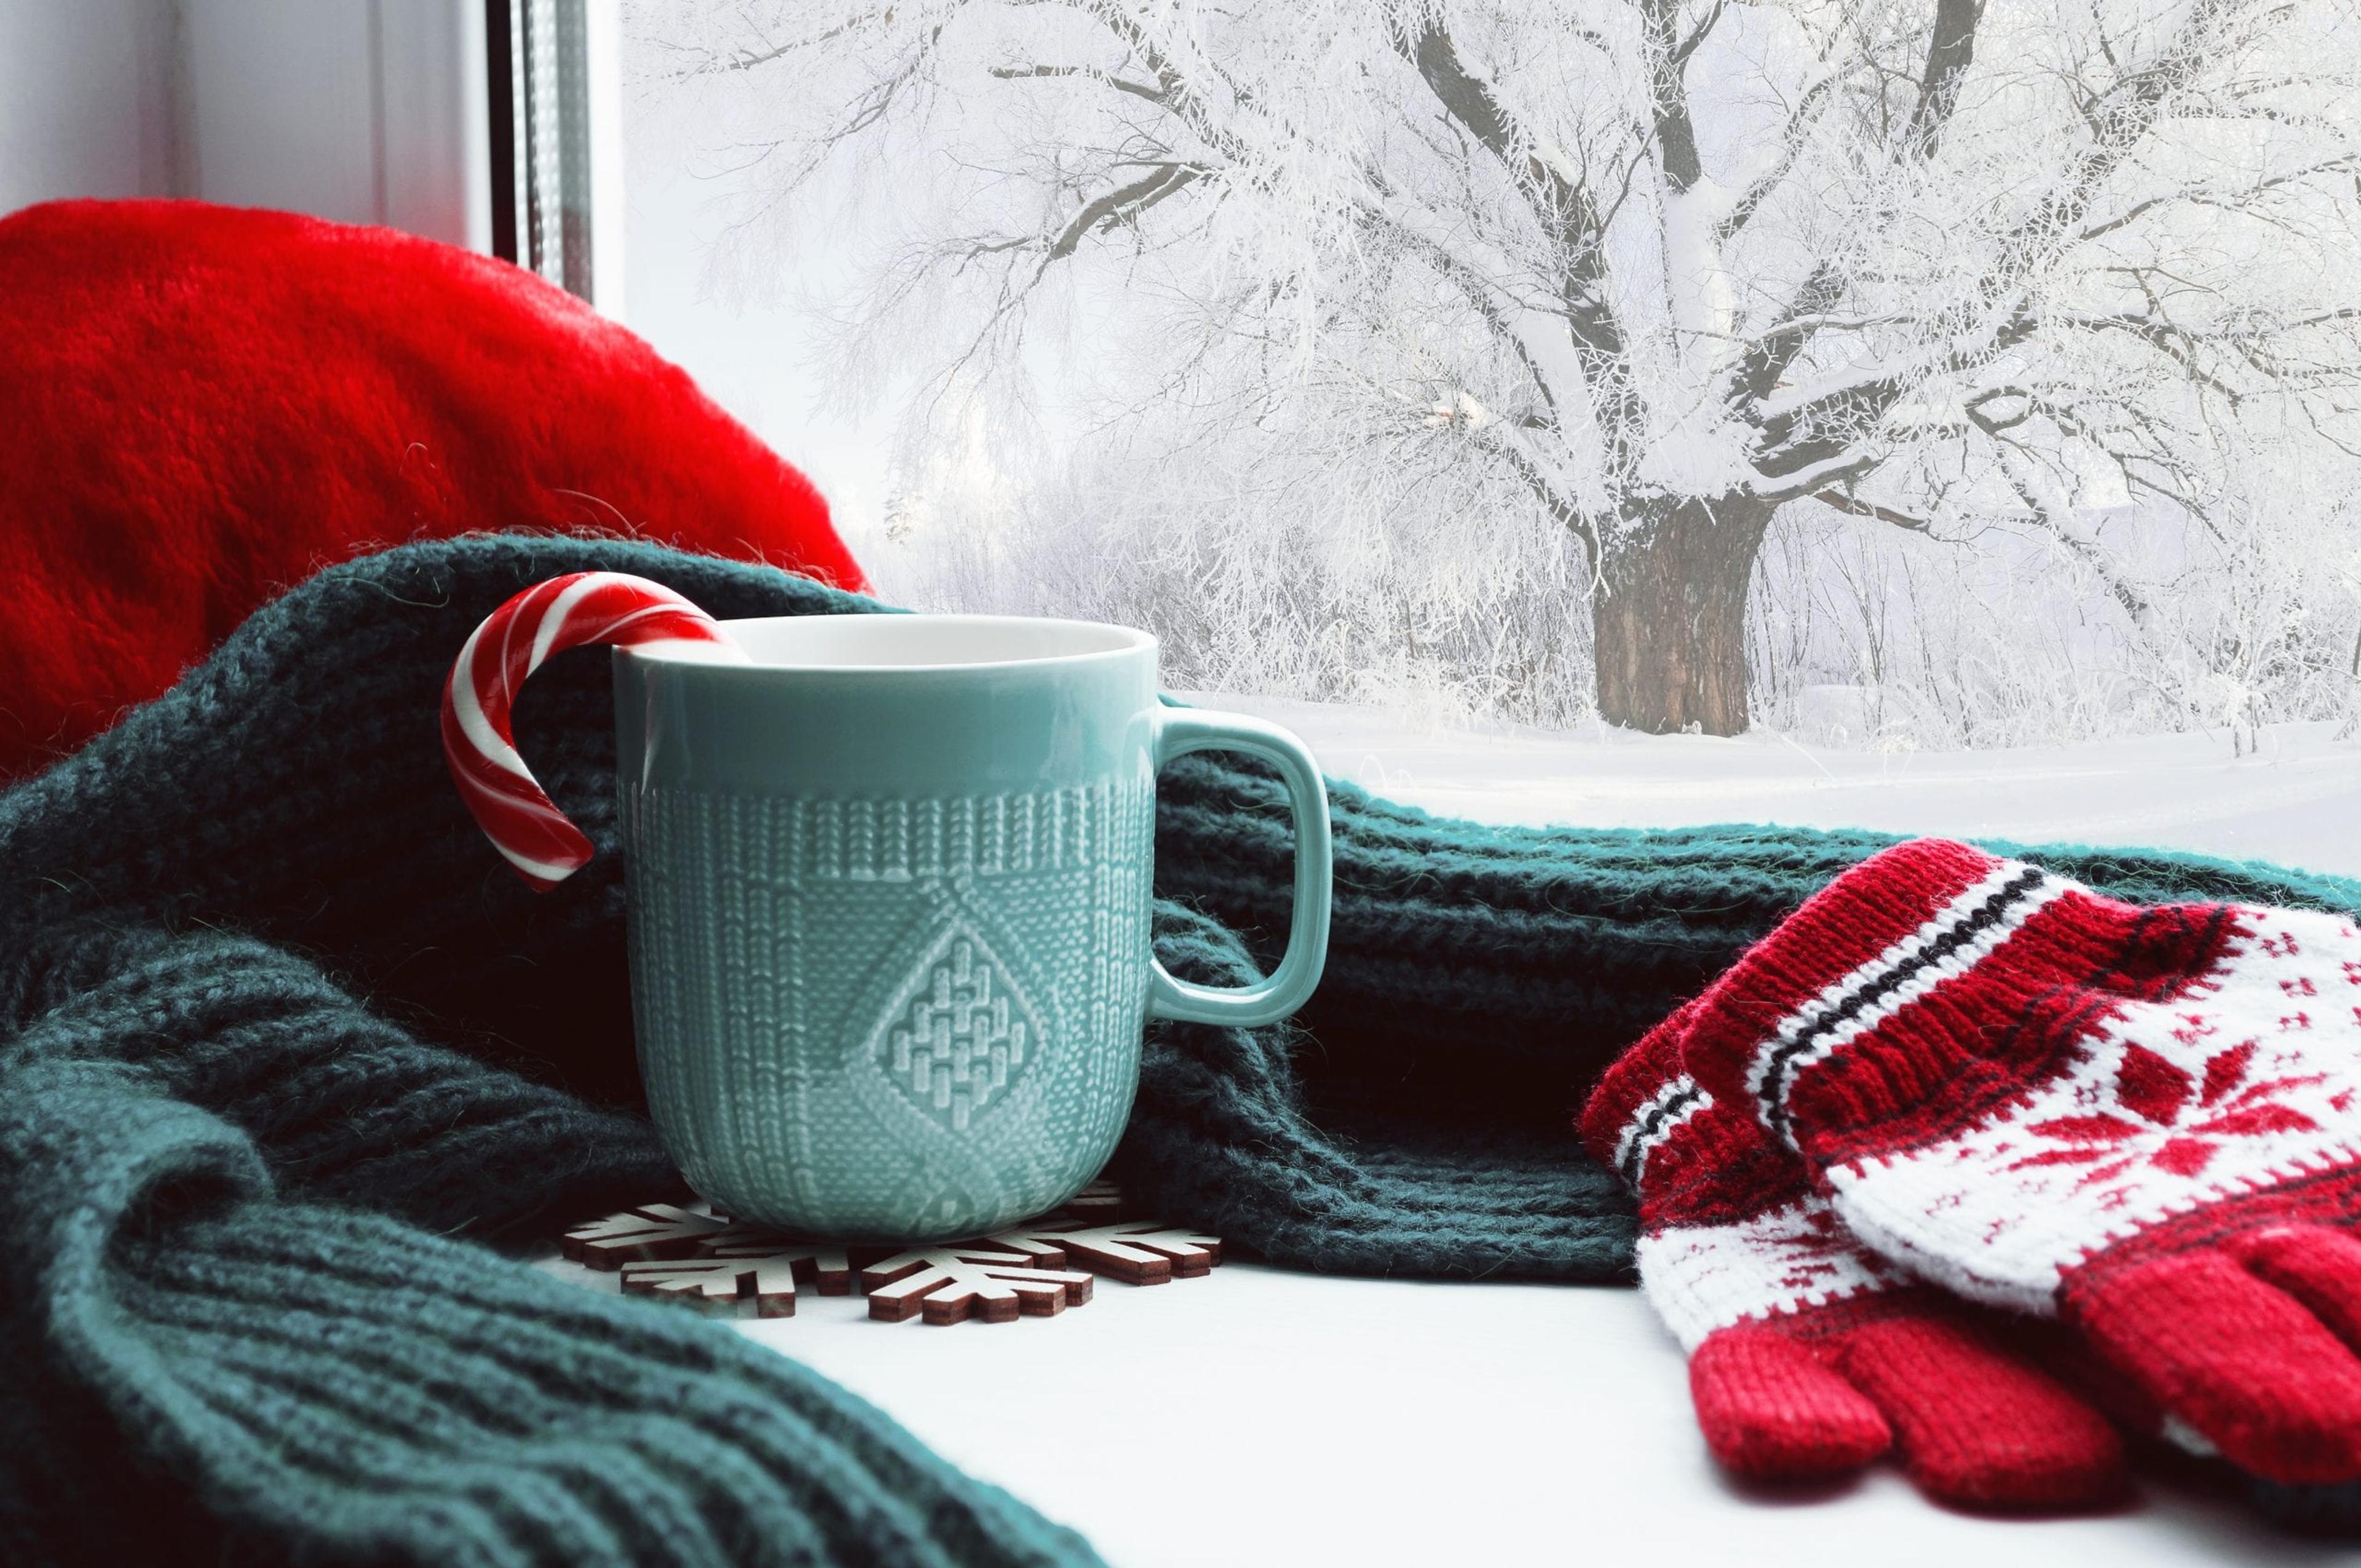 Winter scene with a mug, scarf and gloves on a windowsill looking out over a snowy yard and tree.